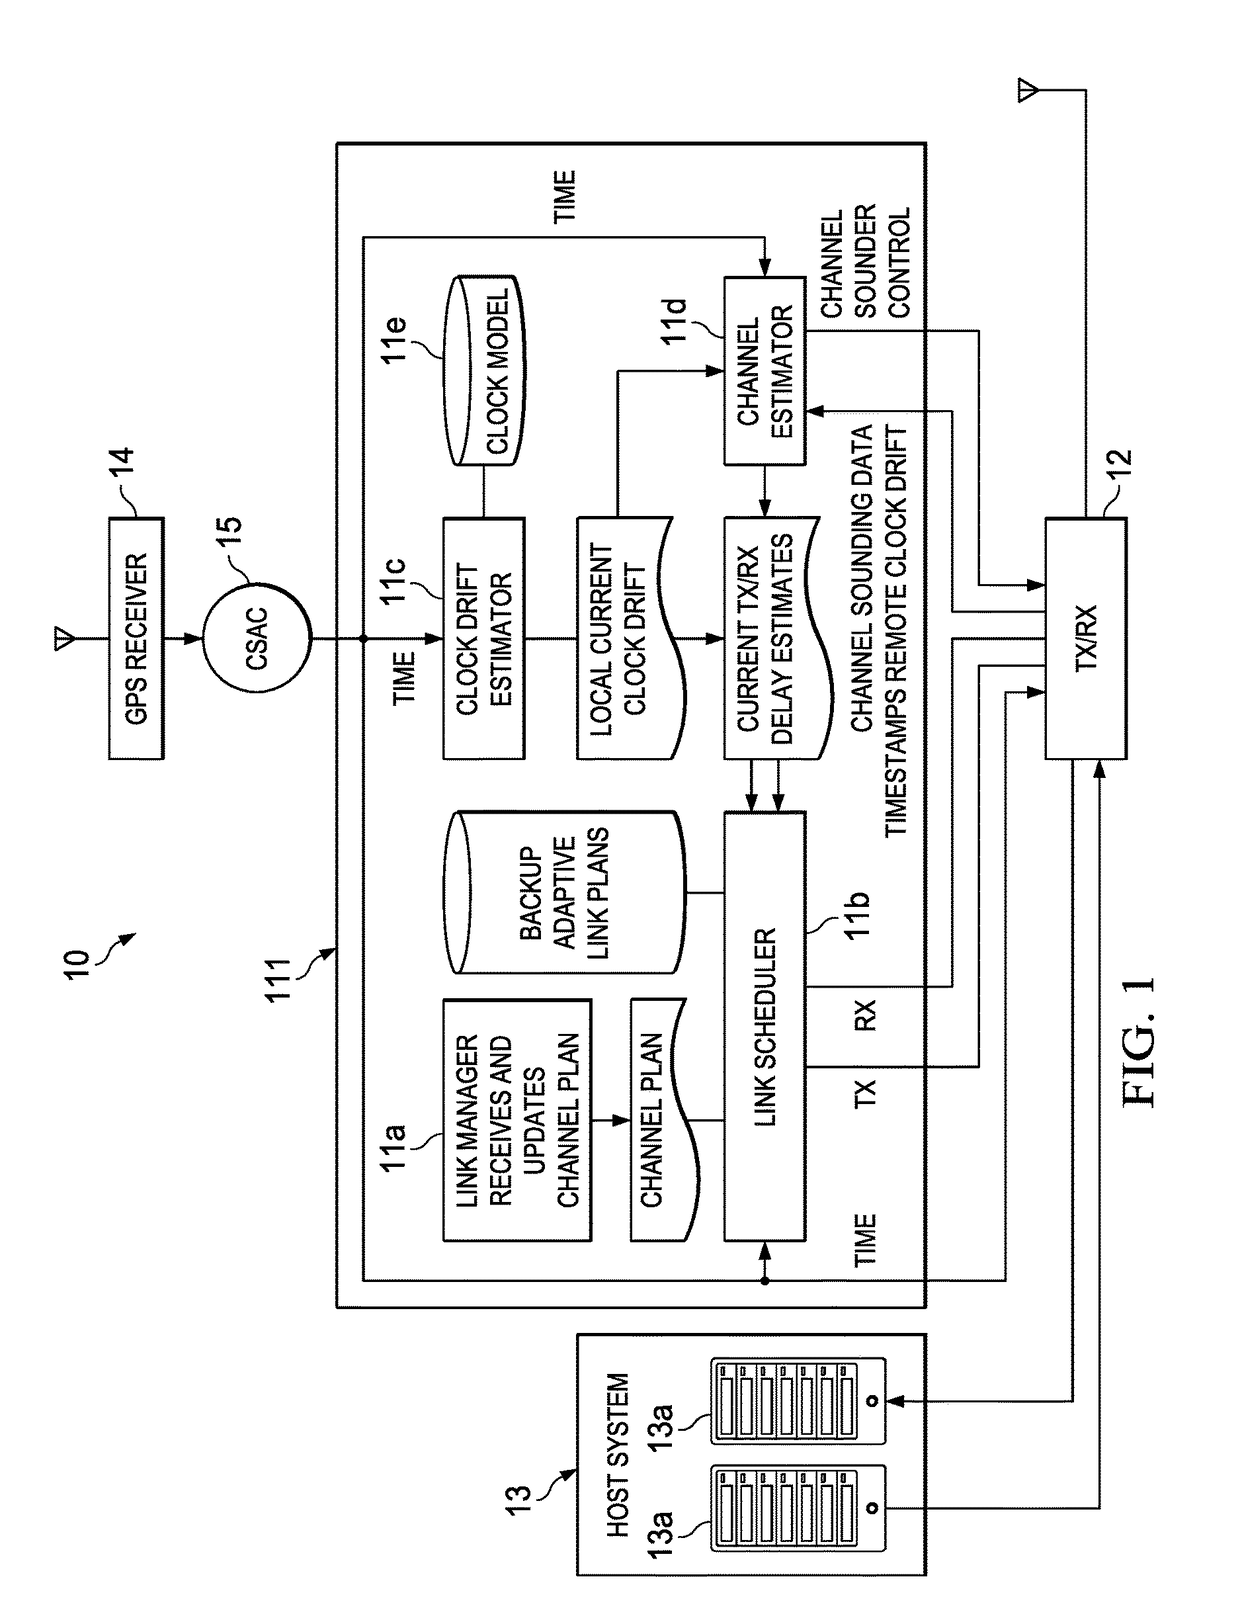 Media access control method with time-coherence and deterministic scheduling for wireless communications network